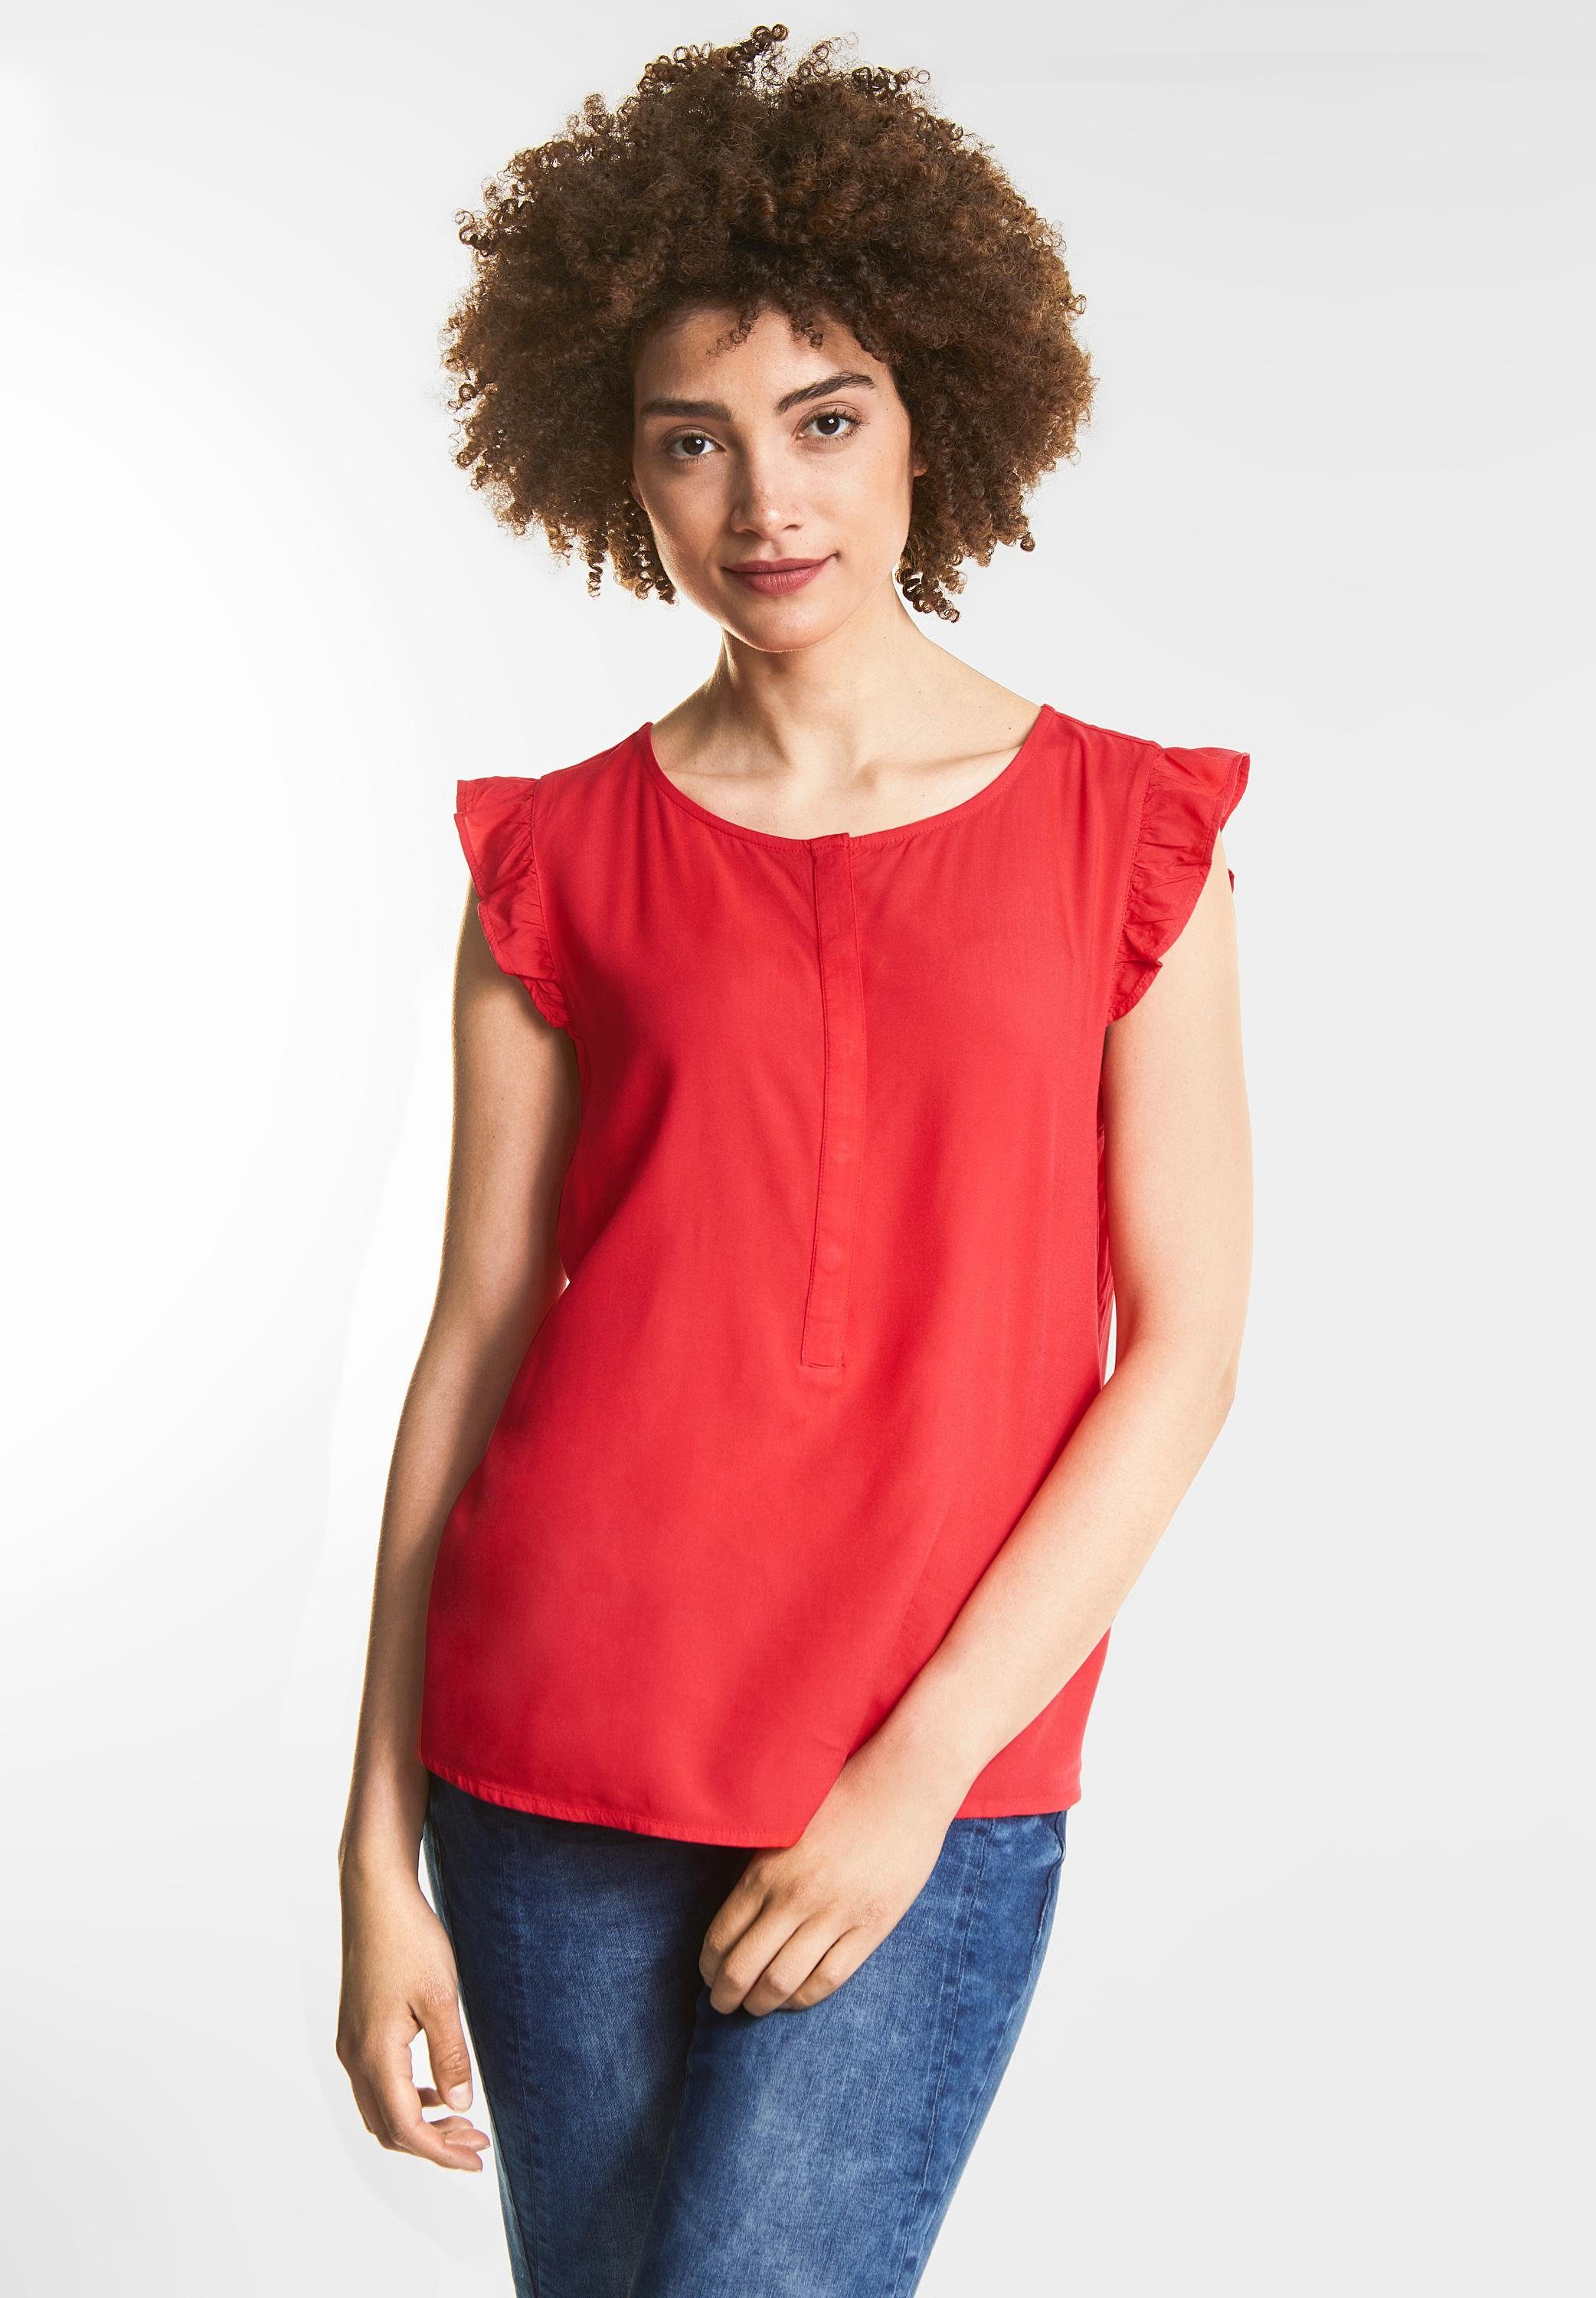 Otto - Street One NU 15% KORTING: Street One Volanttop in blousestijl